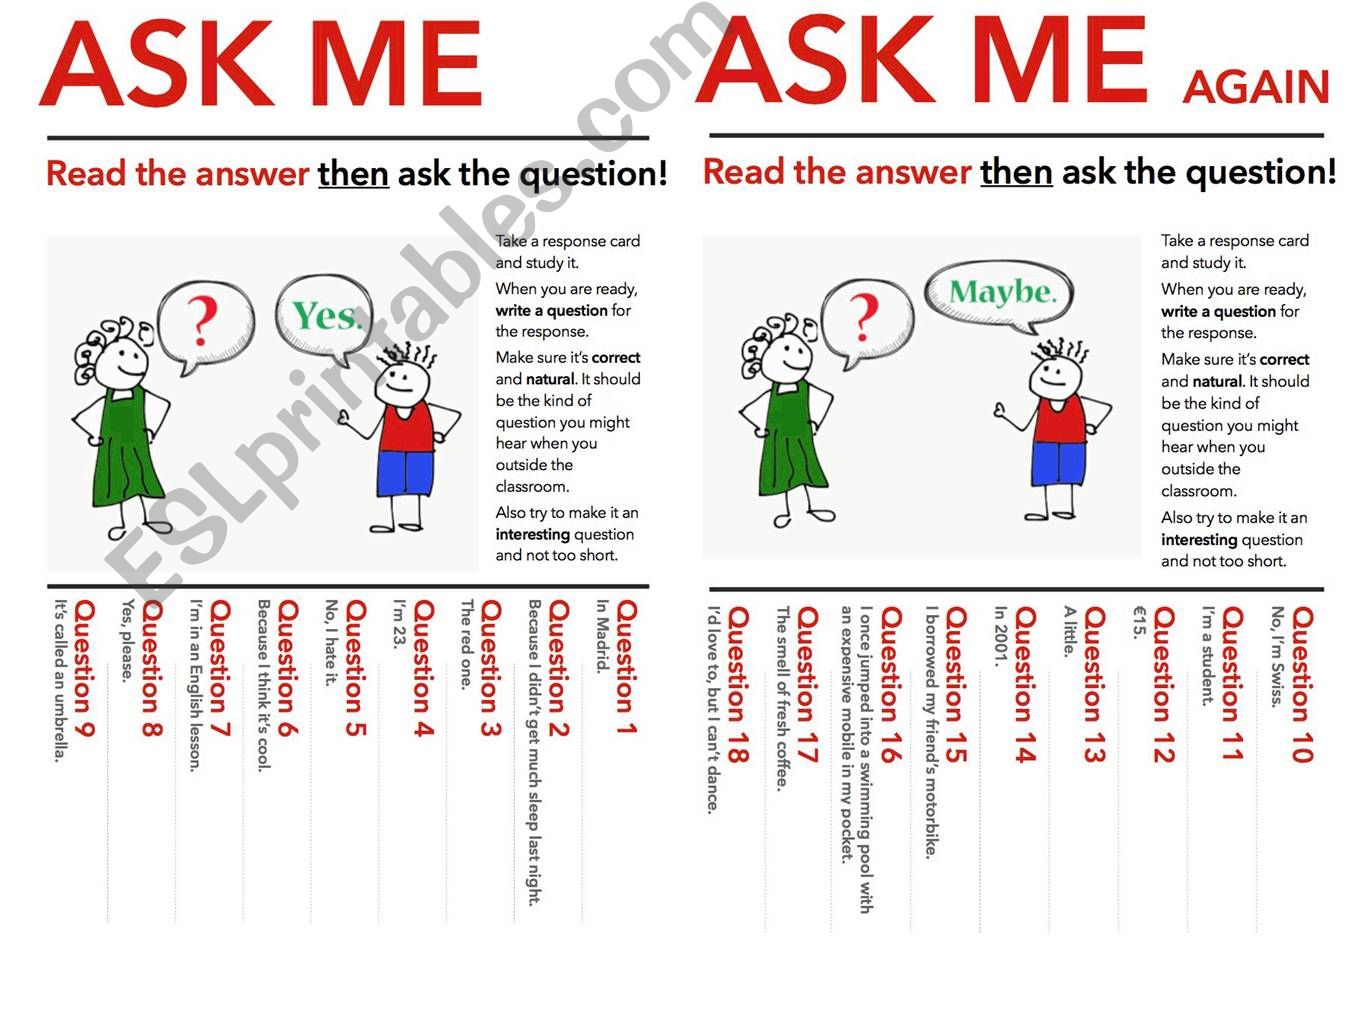 Ask me! Worksheets for students to practice asking questions.